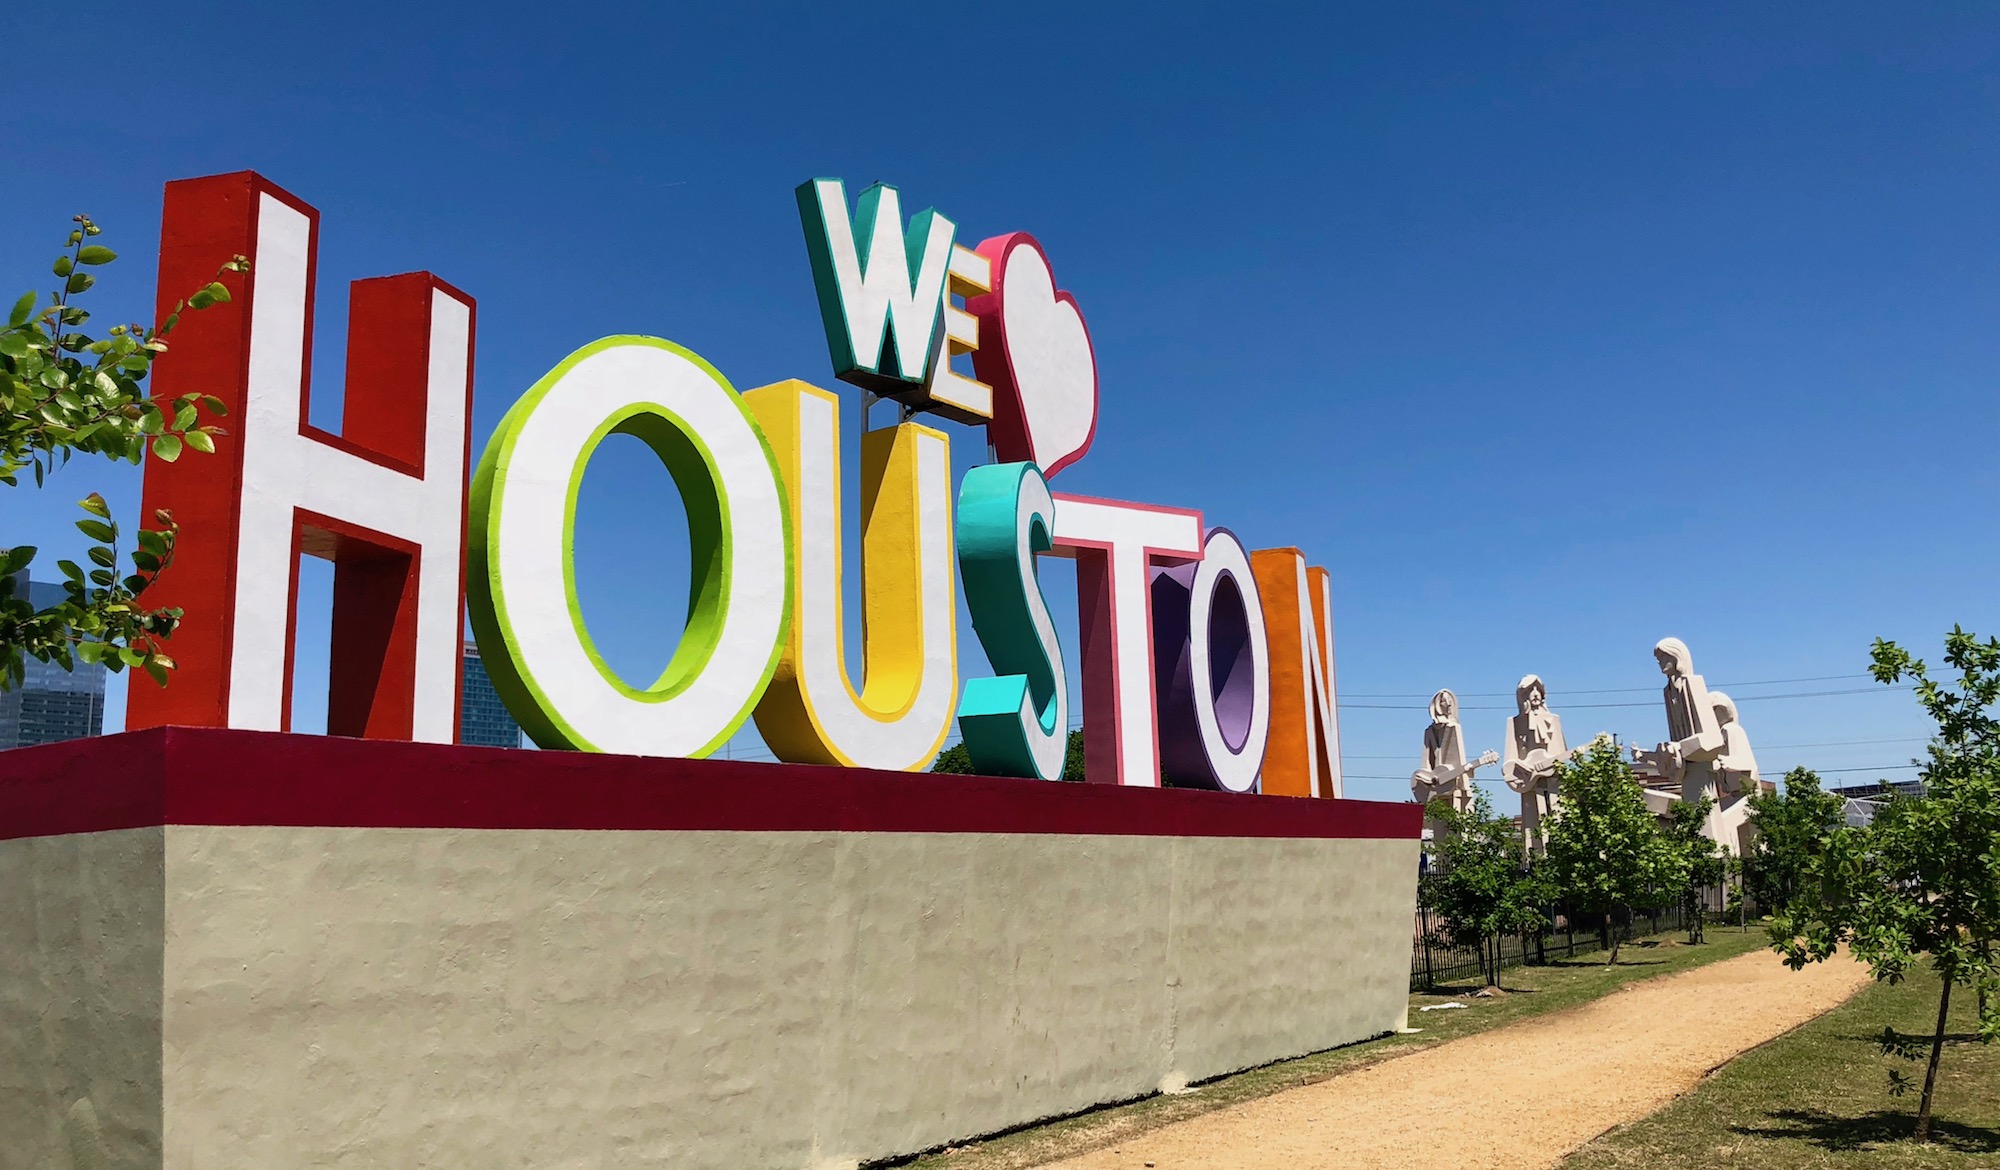 A Design Lover's Guide to Houston